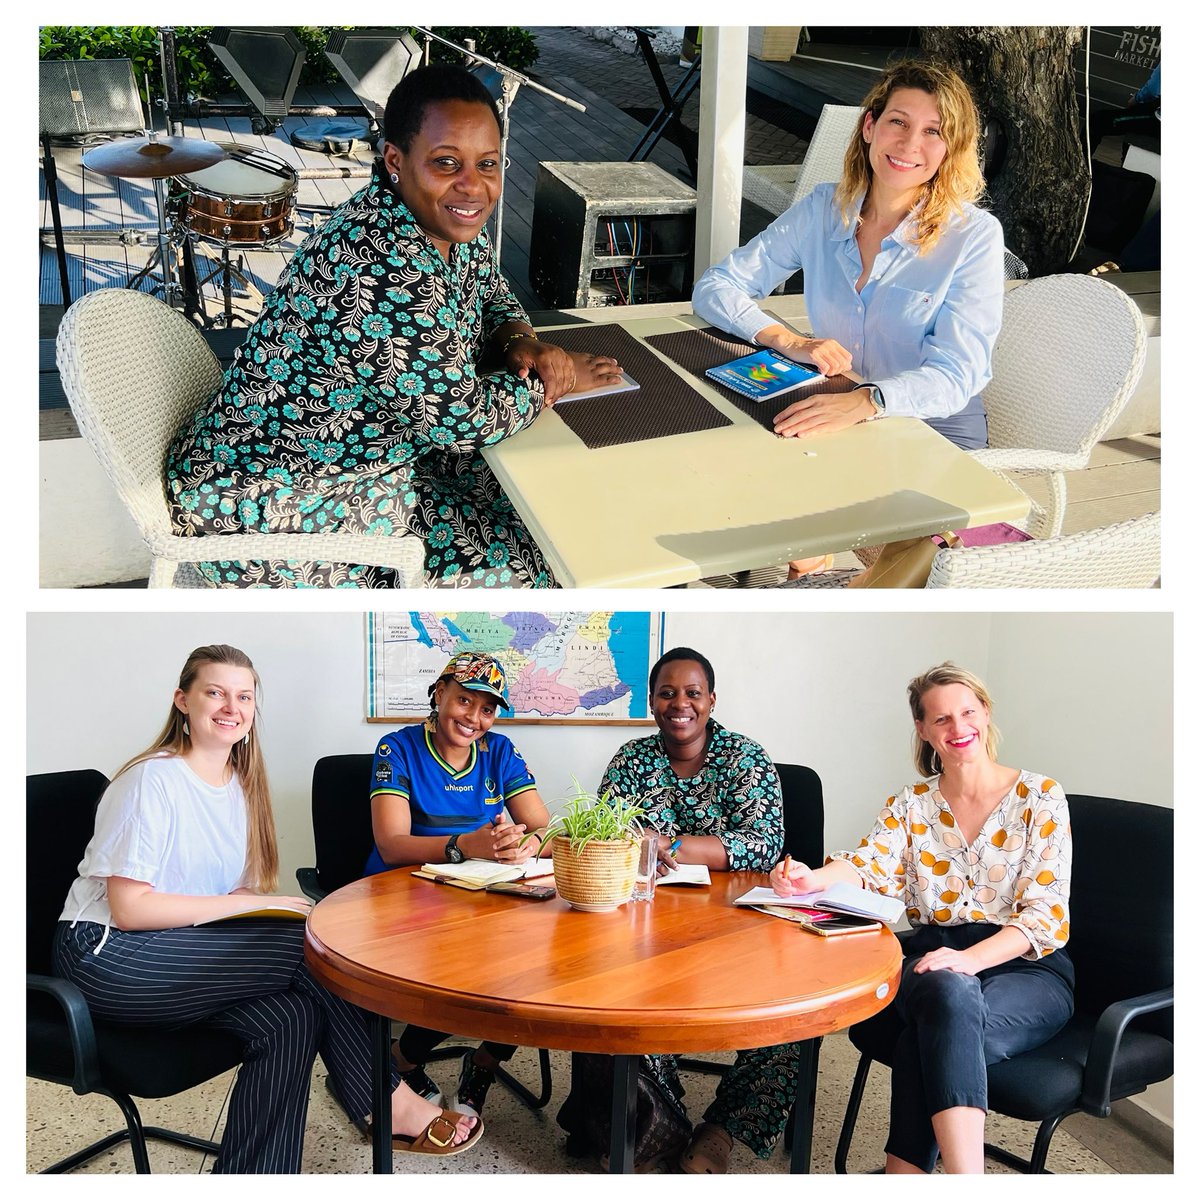 From Year 2021-2024, I championed Gender Equality in Politics & Chair the Women in Politics MP Group. Today, I had great discussions with both @NDI 🇹🇿 & @FESTanzania who are great partners. We penciled in key next activities, to be done in partnership with @WiLDAFTz & @OmukaHub.